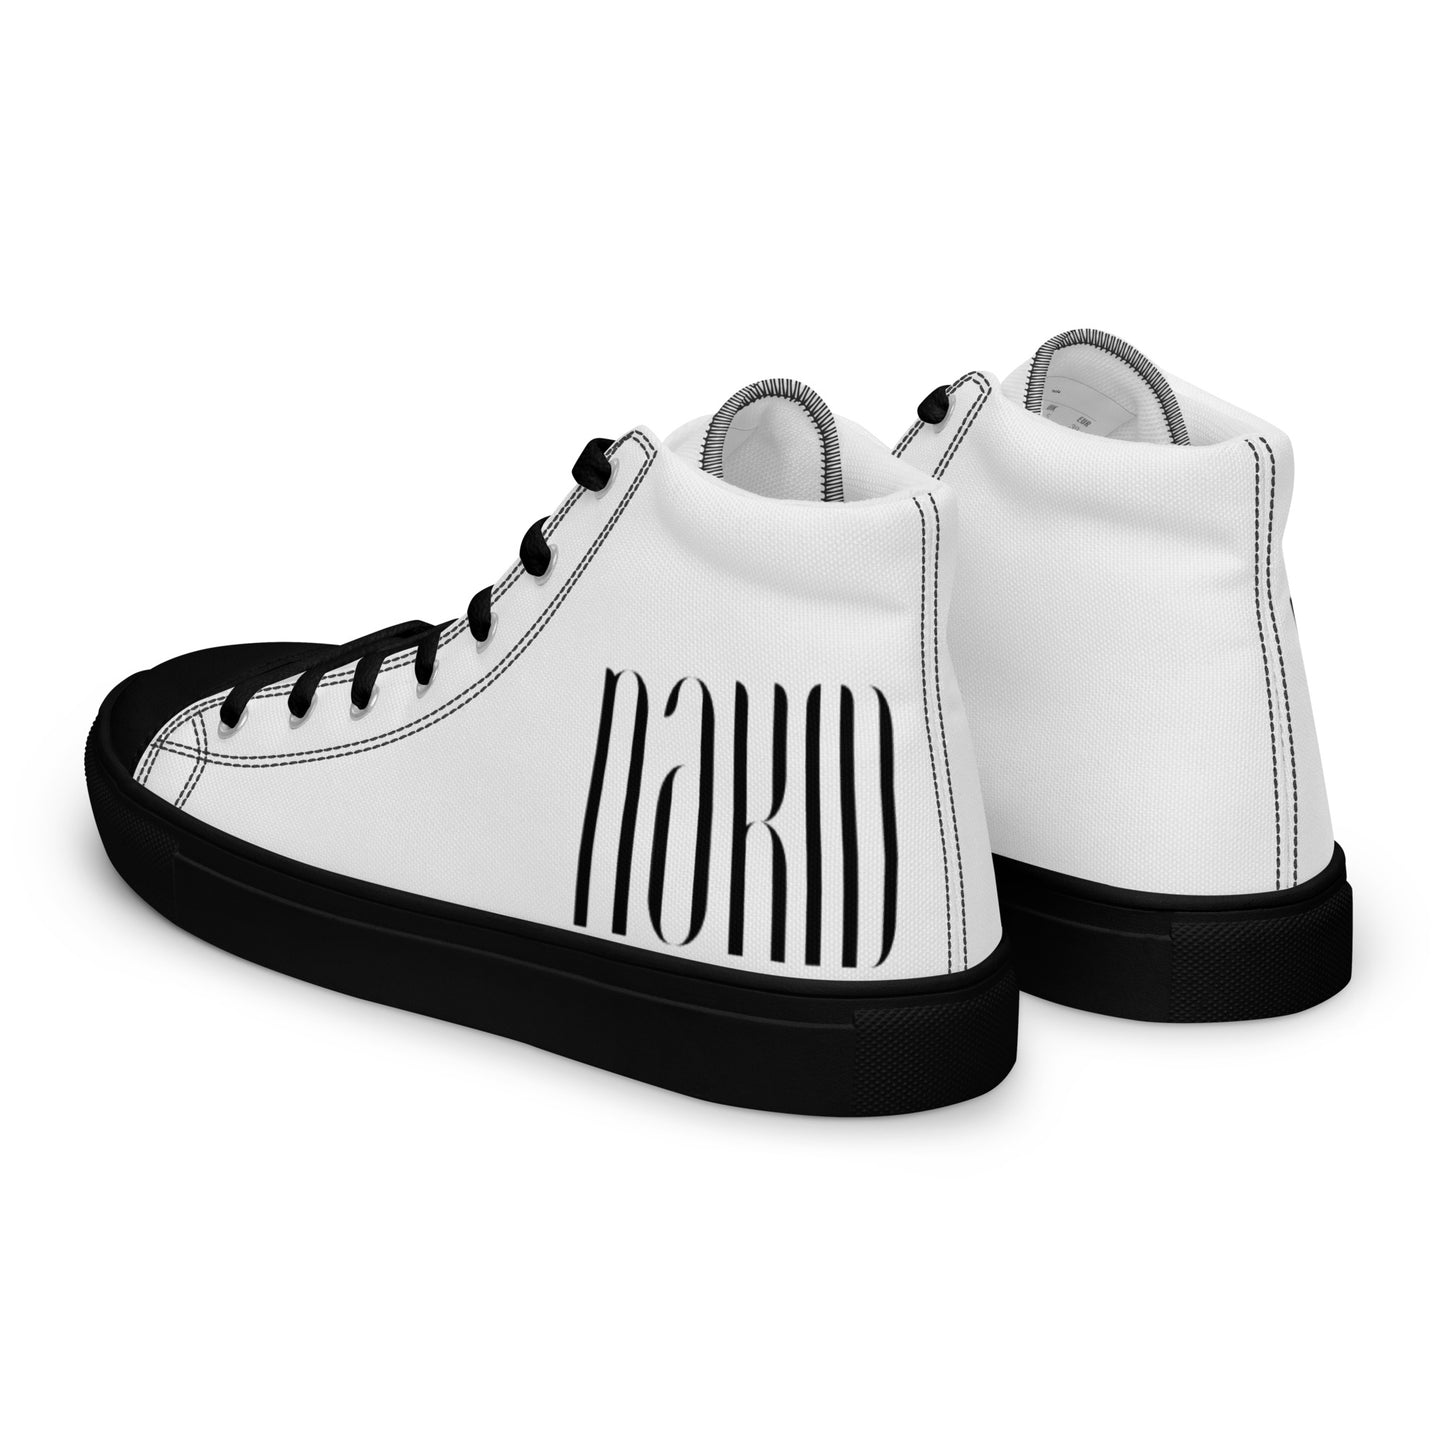 ‘NAKID’ Brand Logo – Men’s High Top Canvas Shoes